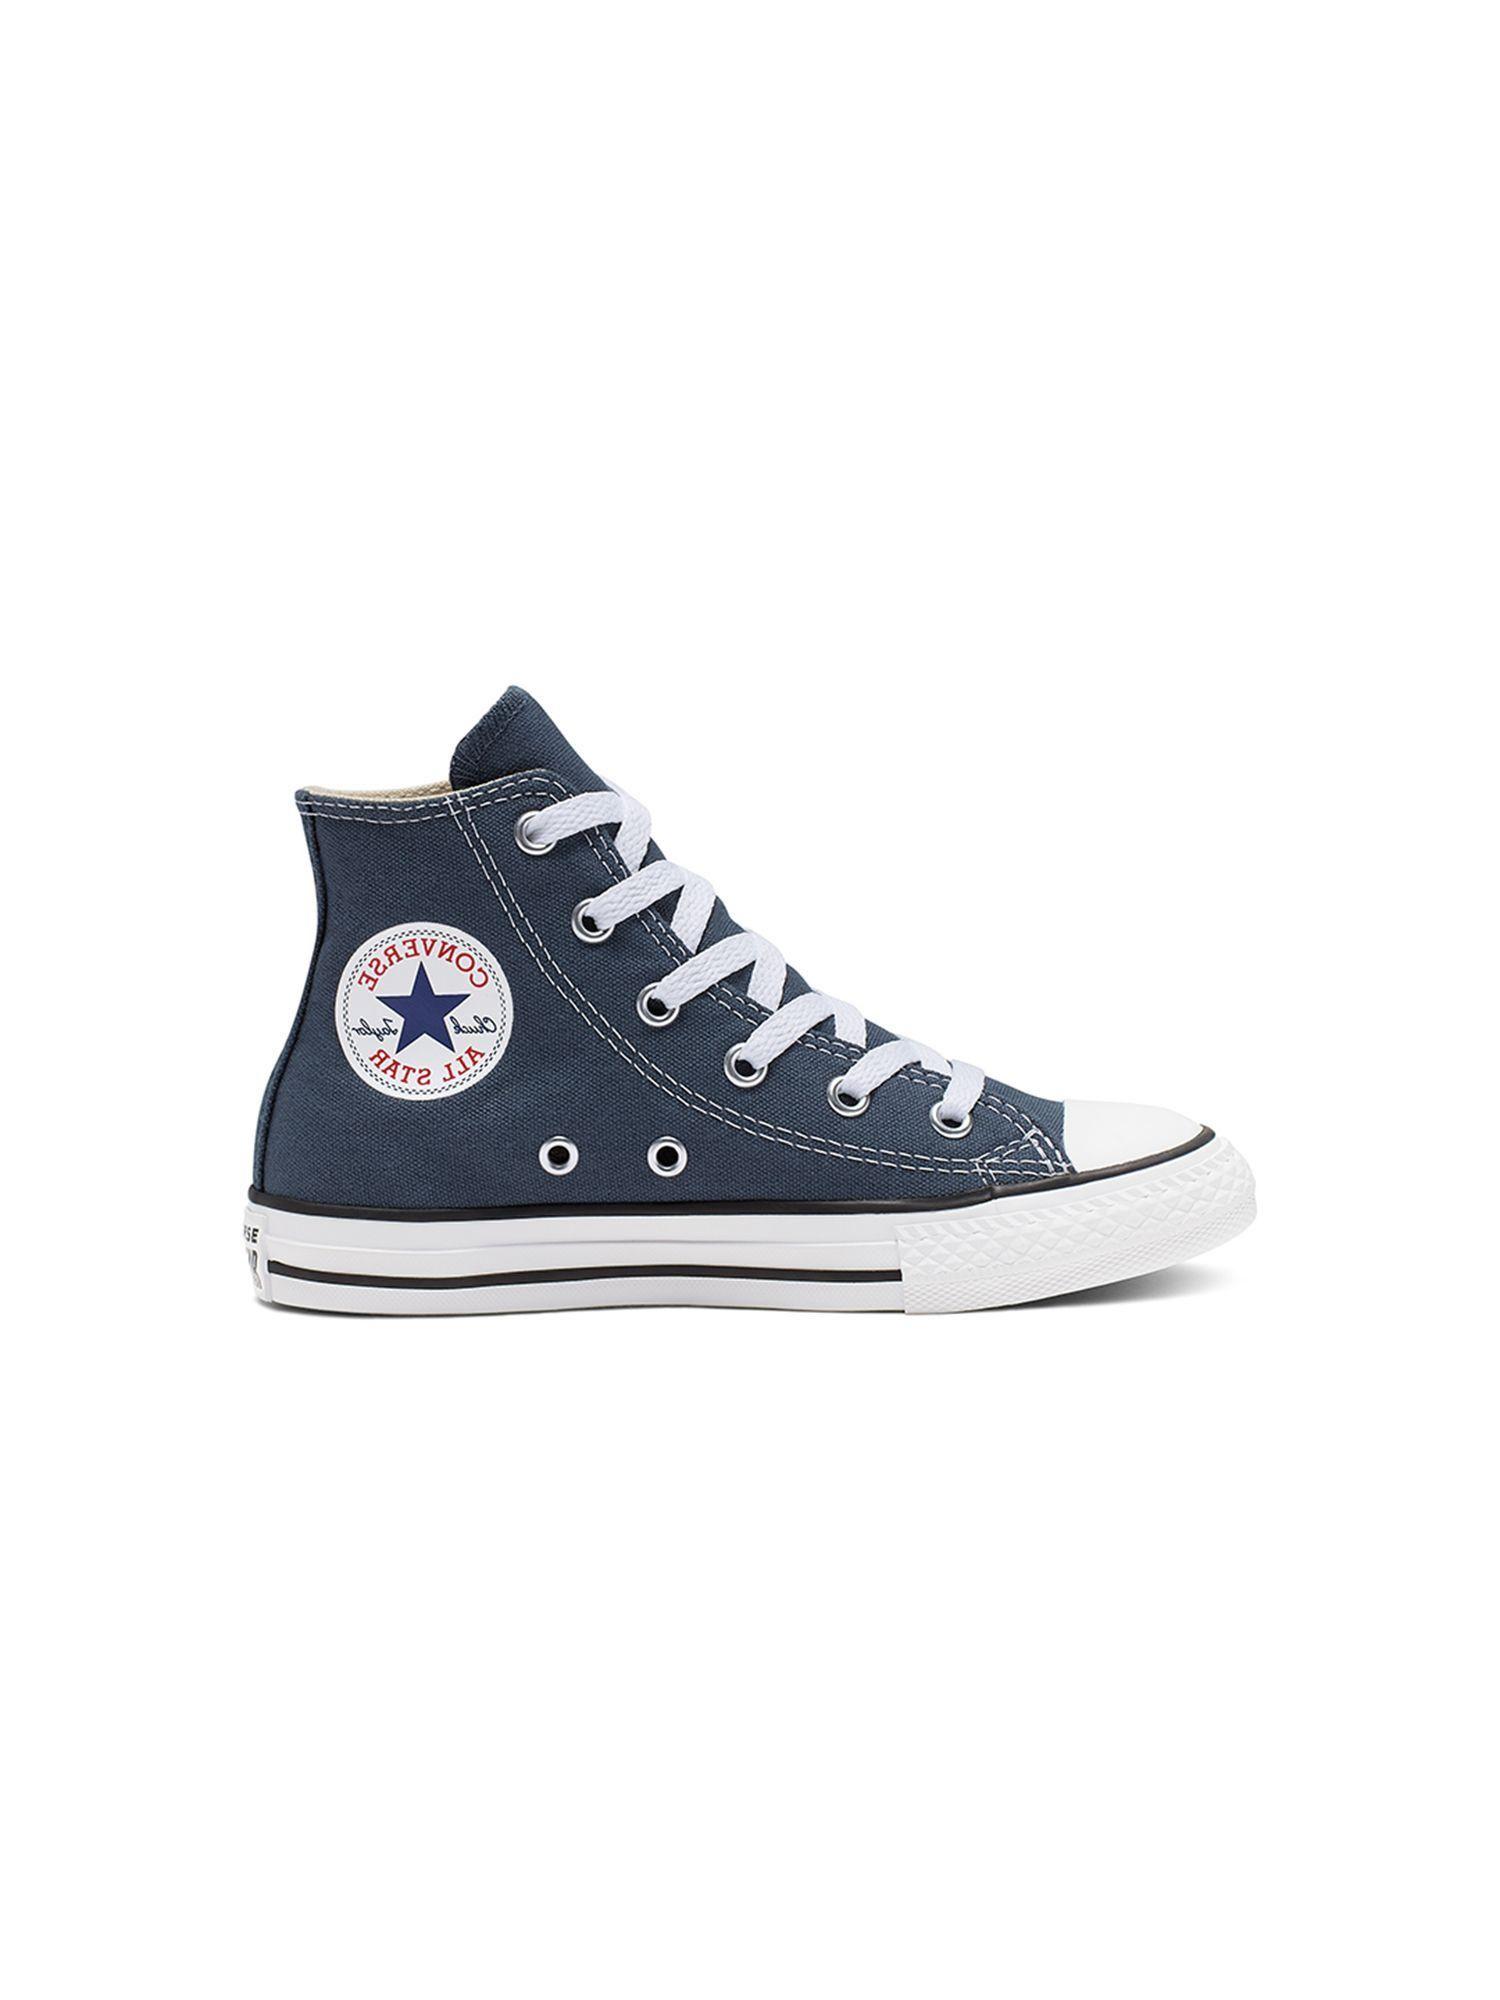 Kids Chuck Taylor All Star Sneakers